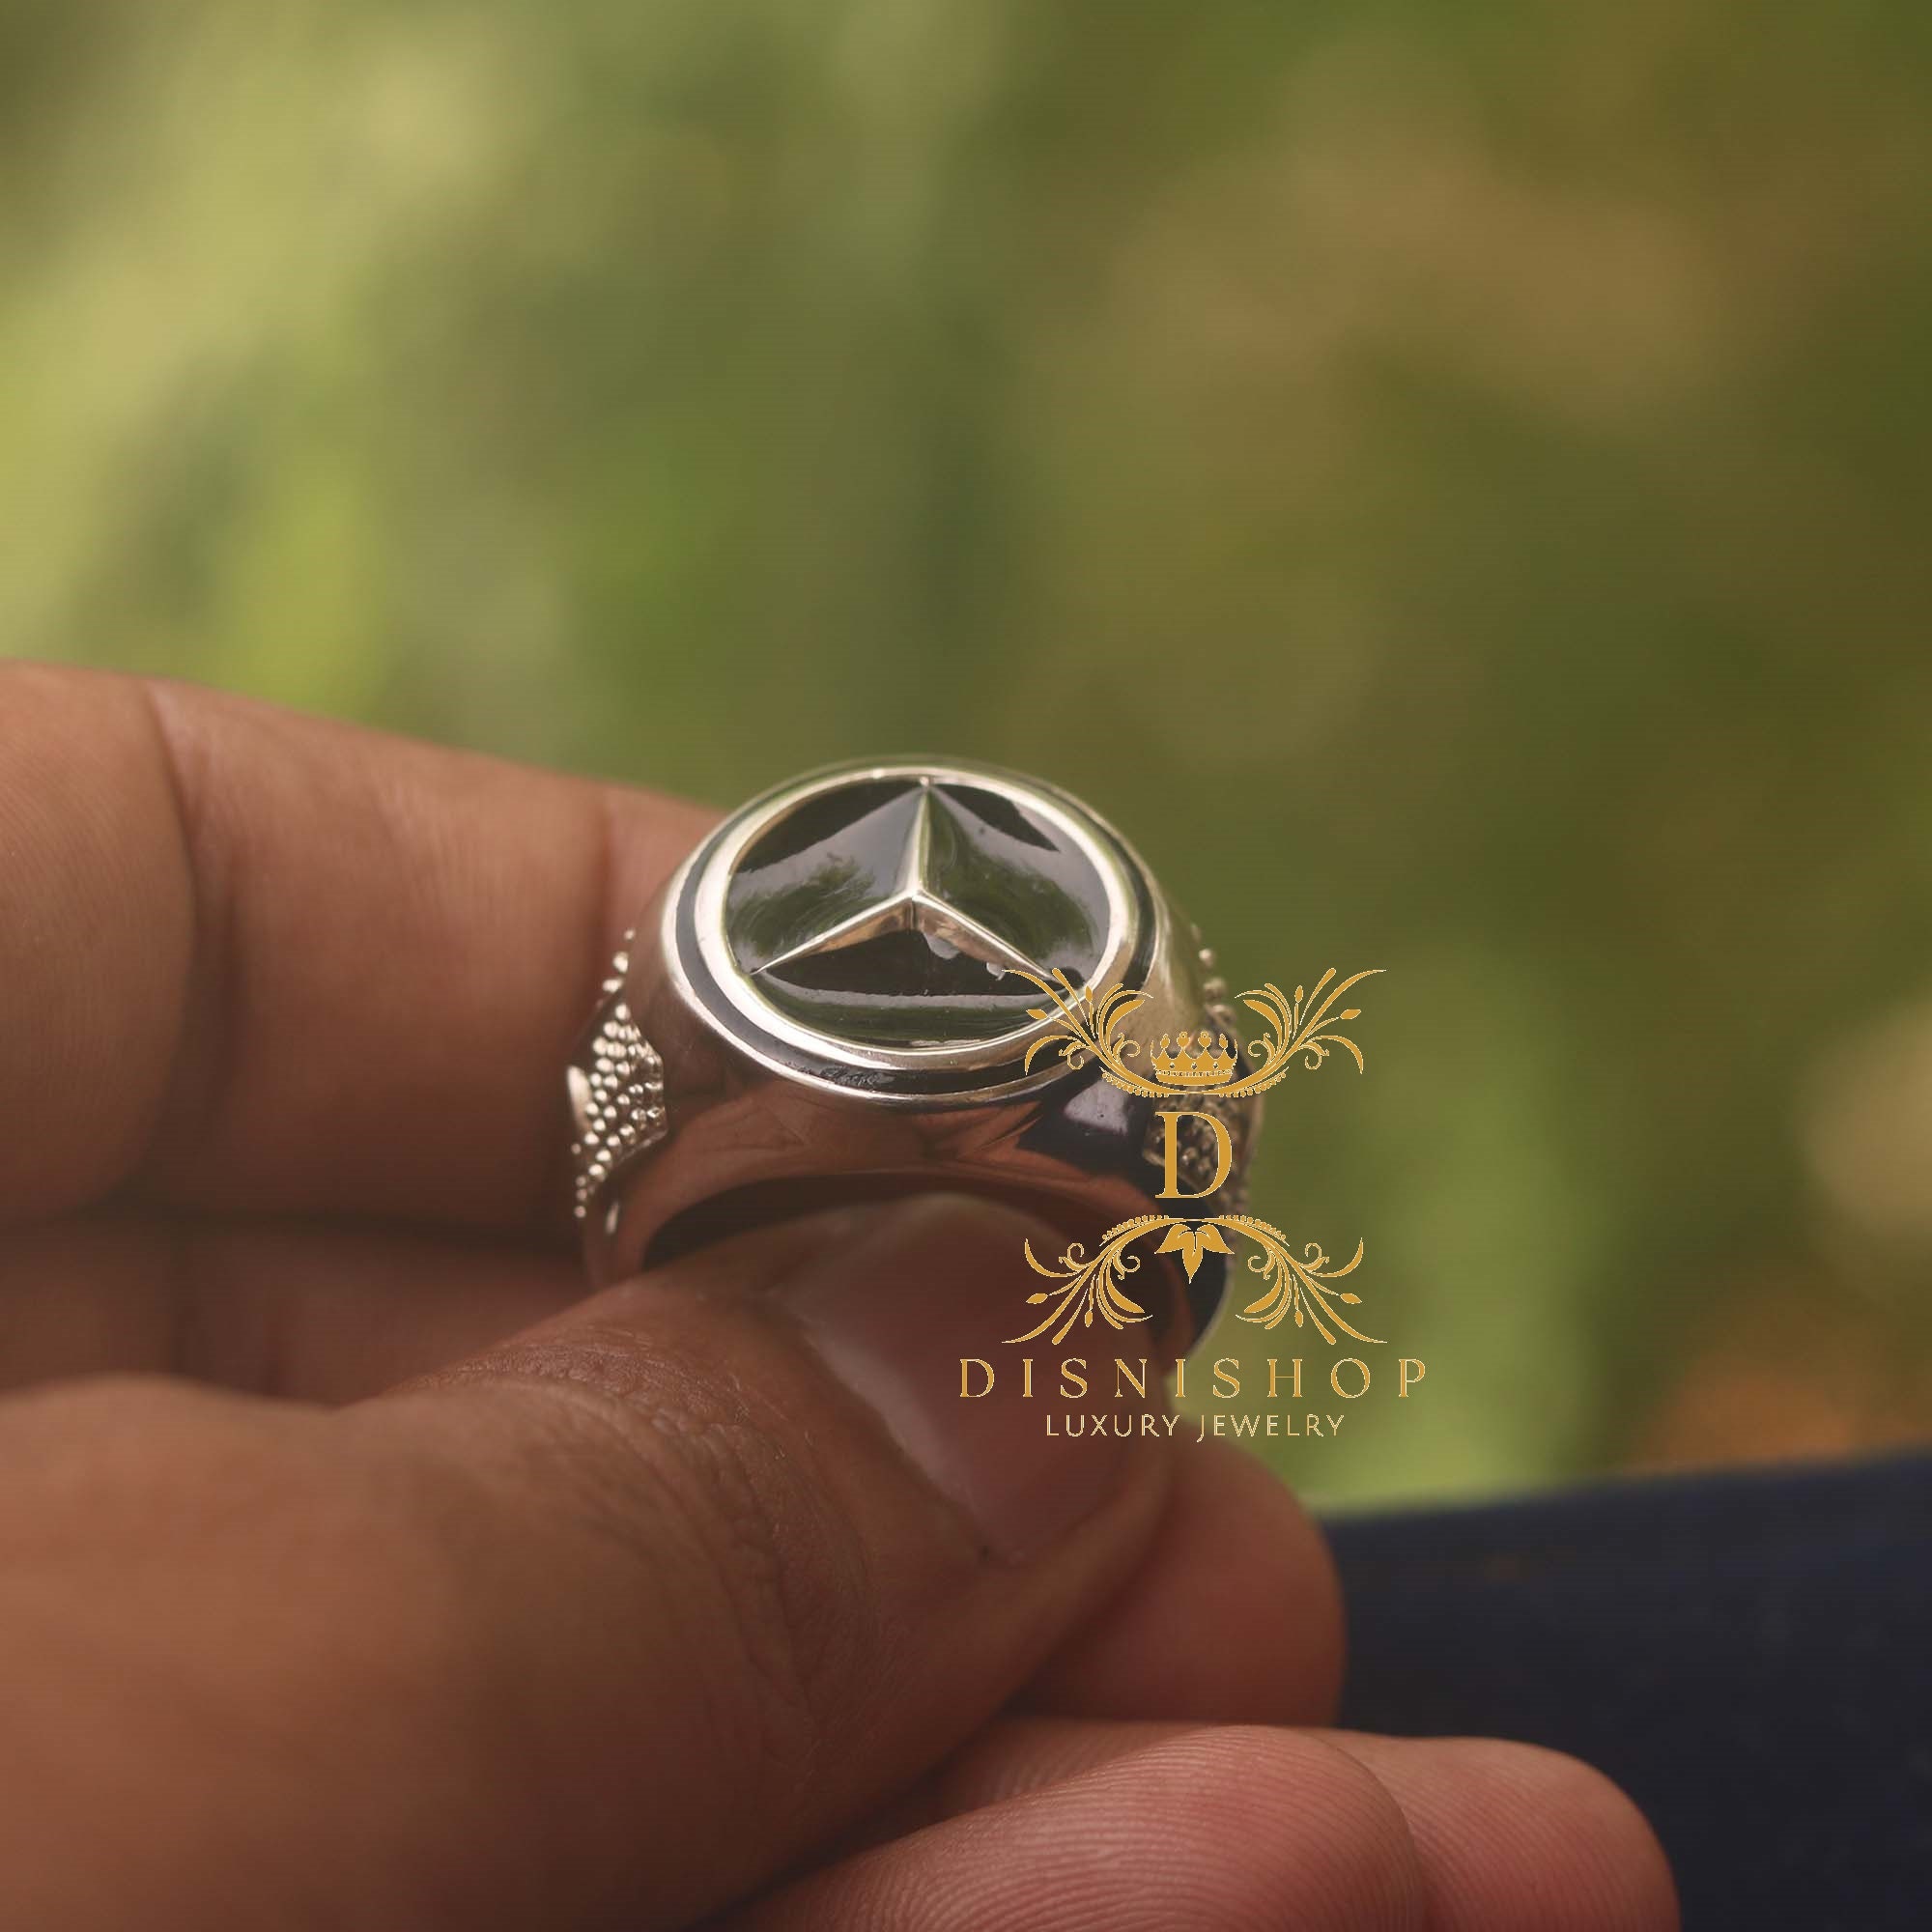 Buy Mercedes Ring,mercedes Benz Ring, 925 Sterling Silver, Latest Design 3d, mercedes Man's Ring, Gift for Him, Benz Logo Silver Ring, Christmas Online  in India - Etsy